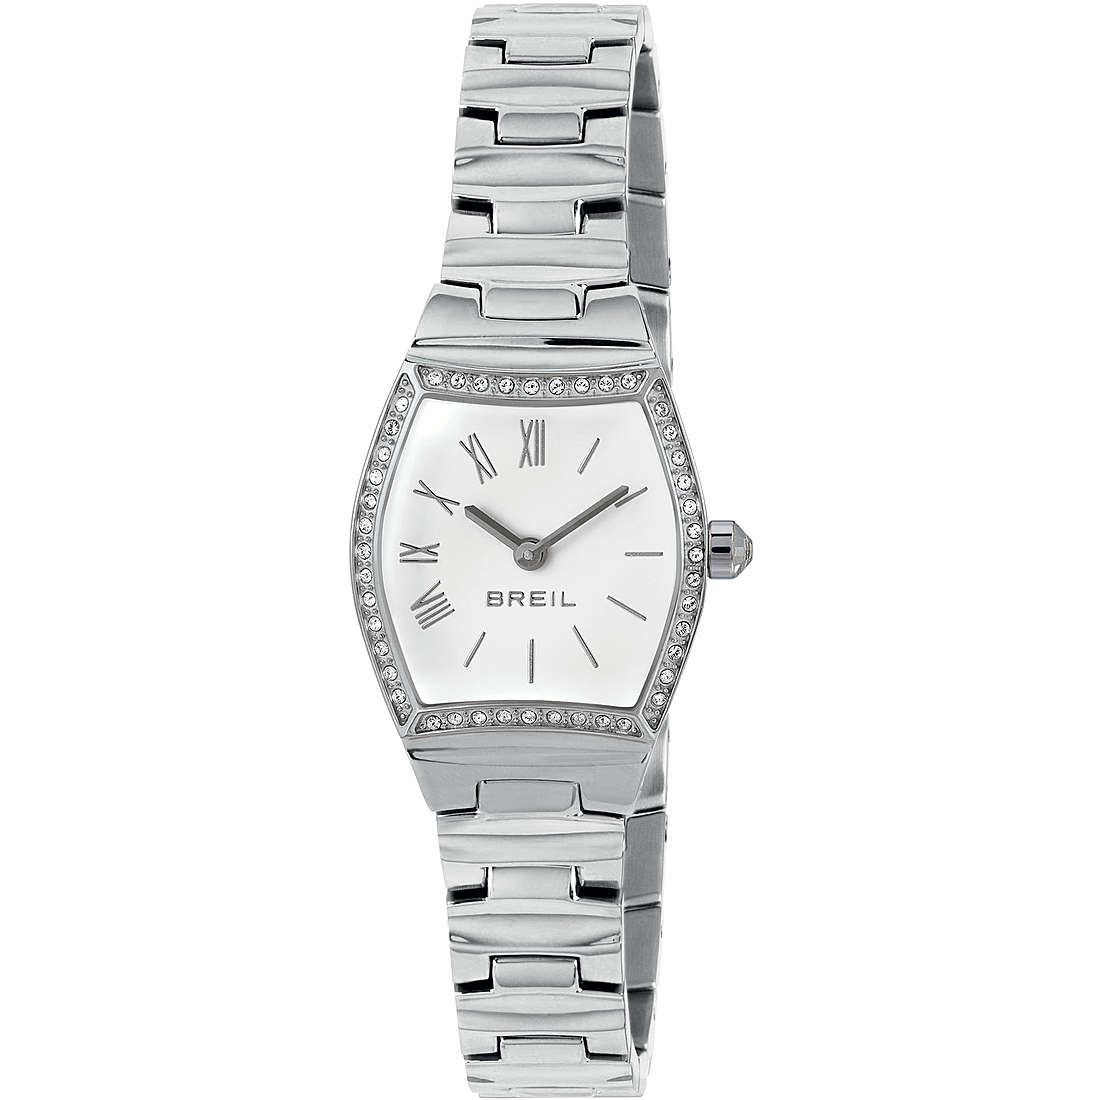 only time watch Steel White dial woman Barrel TW1803